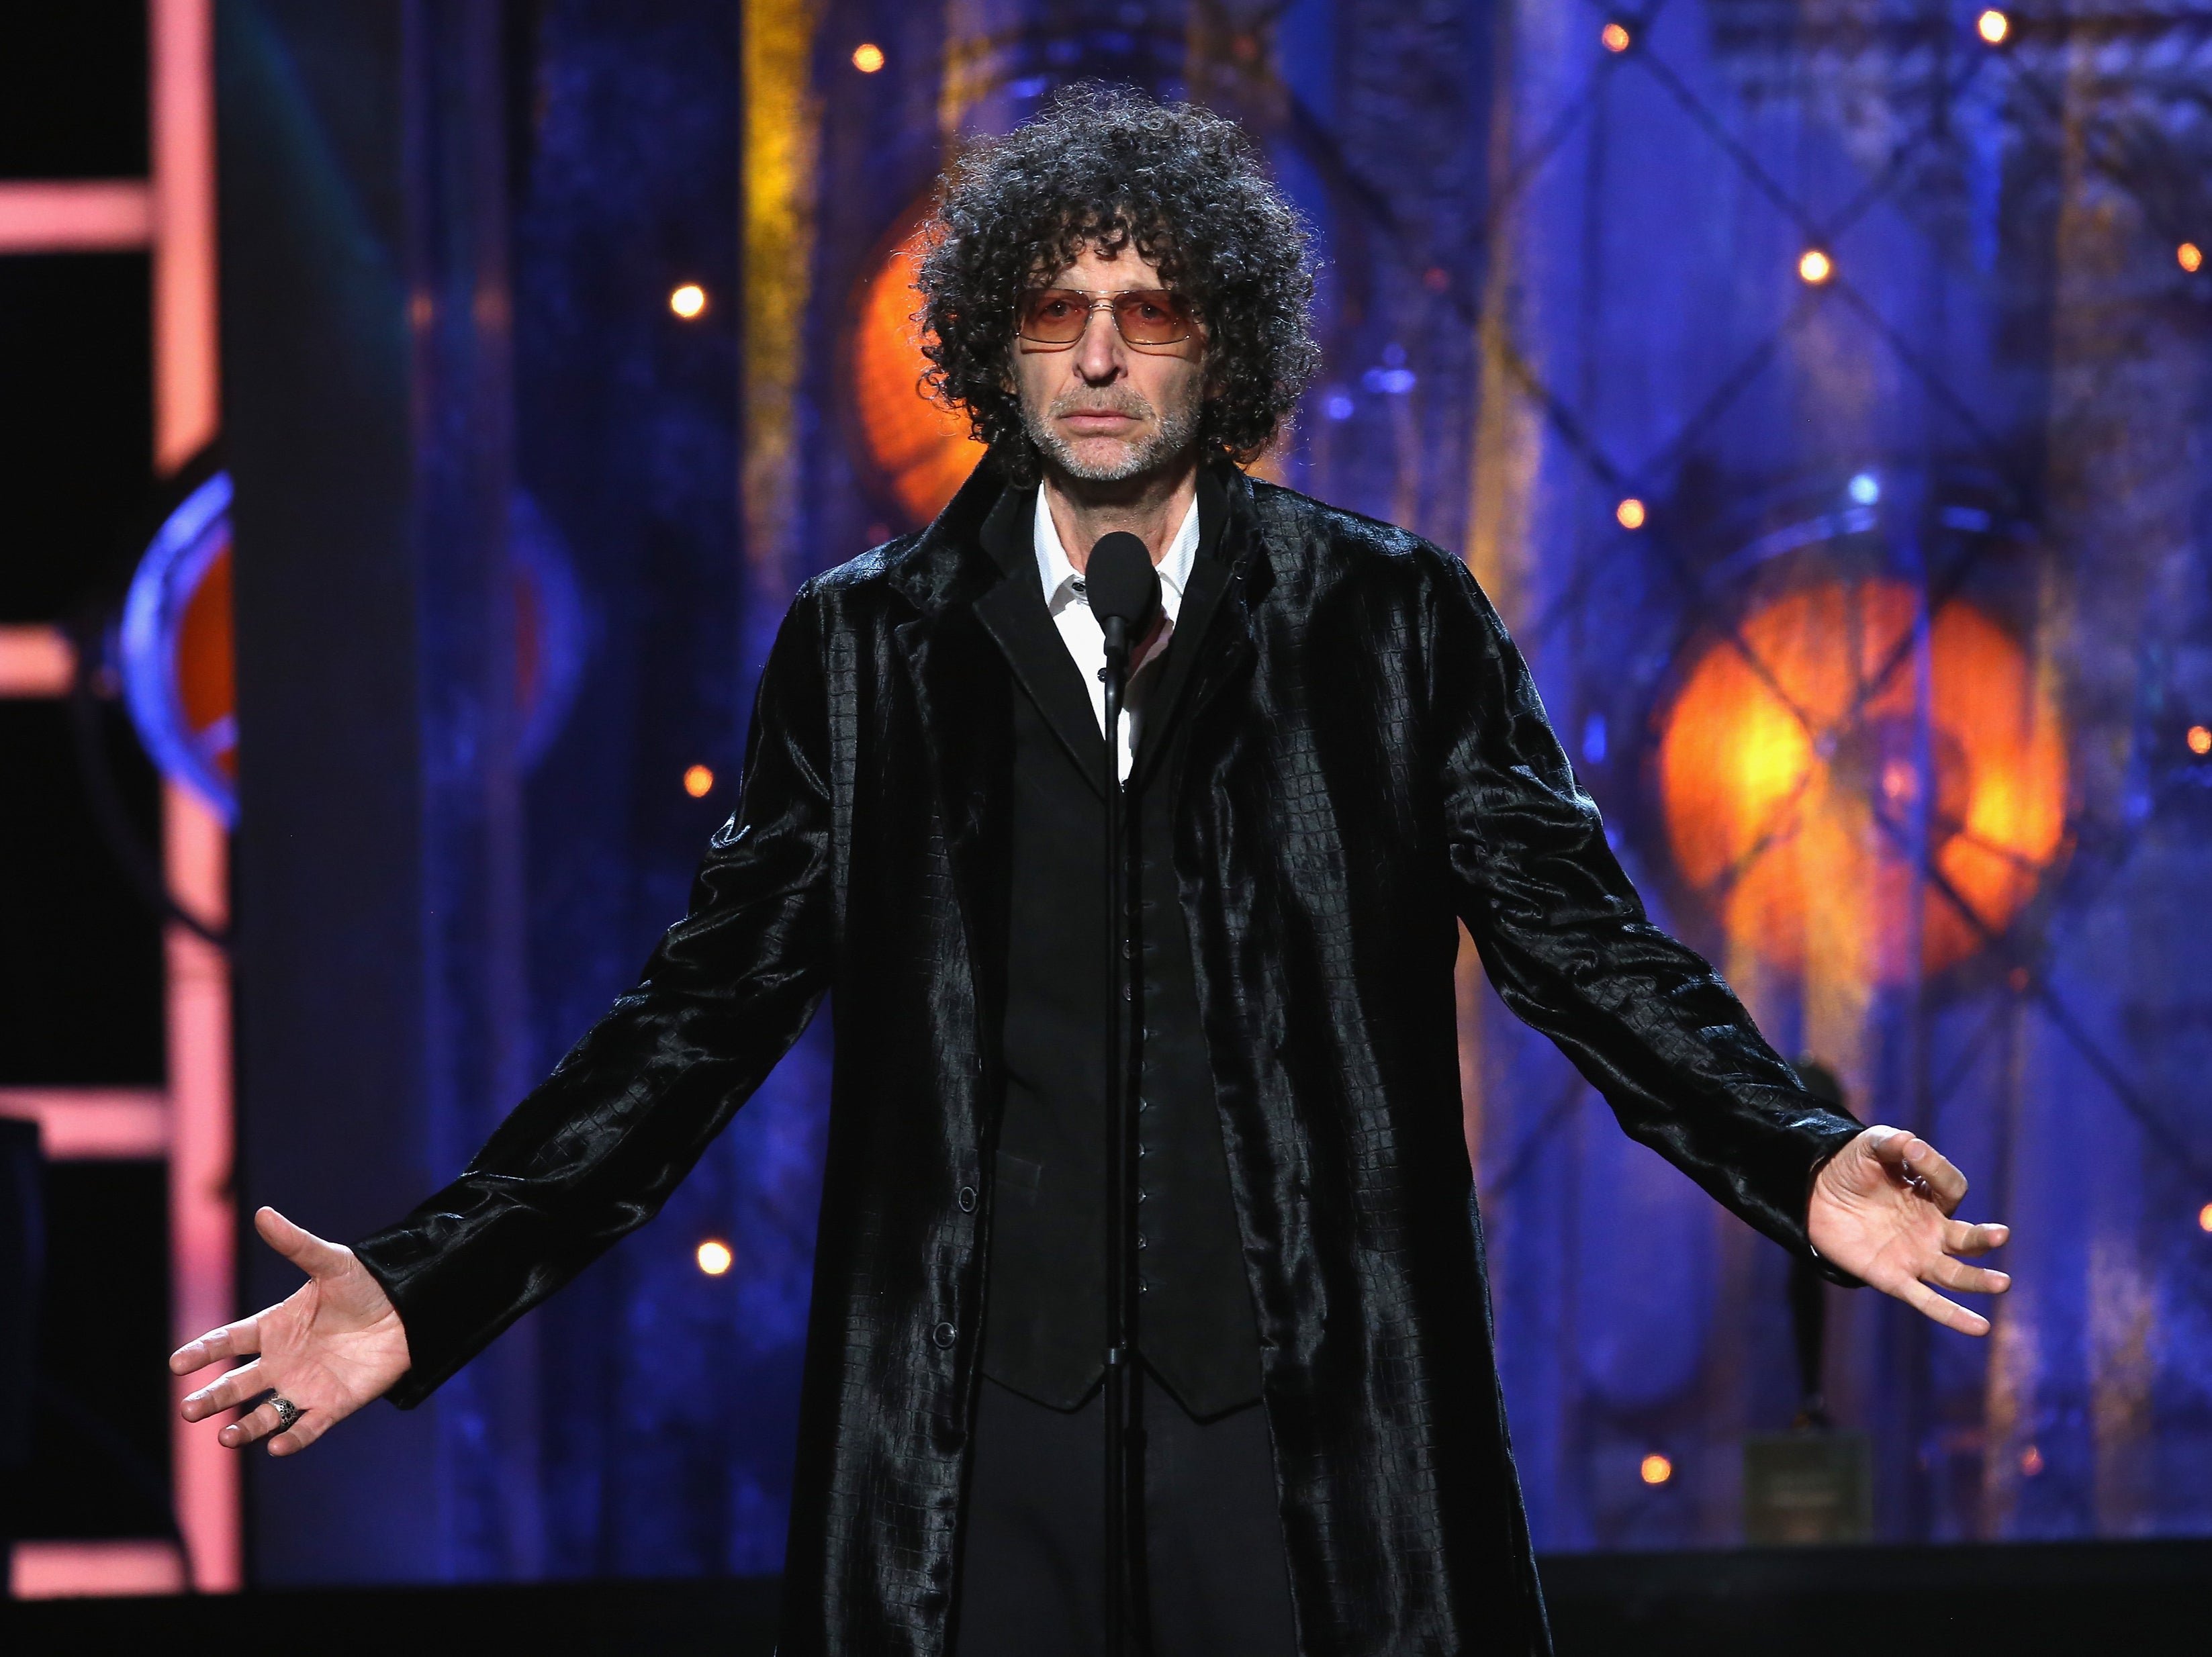 Howard Stern inducts Bon Jovi during the 33rd annual Rock & Roll Hall of Fame induction ceremony on 14 April 2018 in Cleveland, Ohio